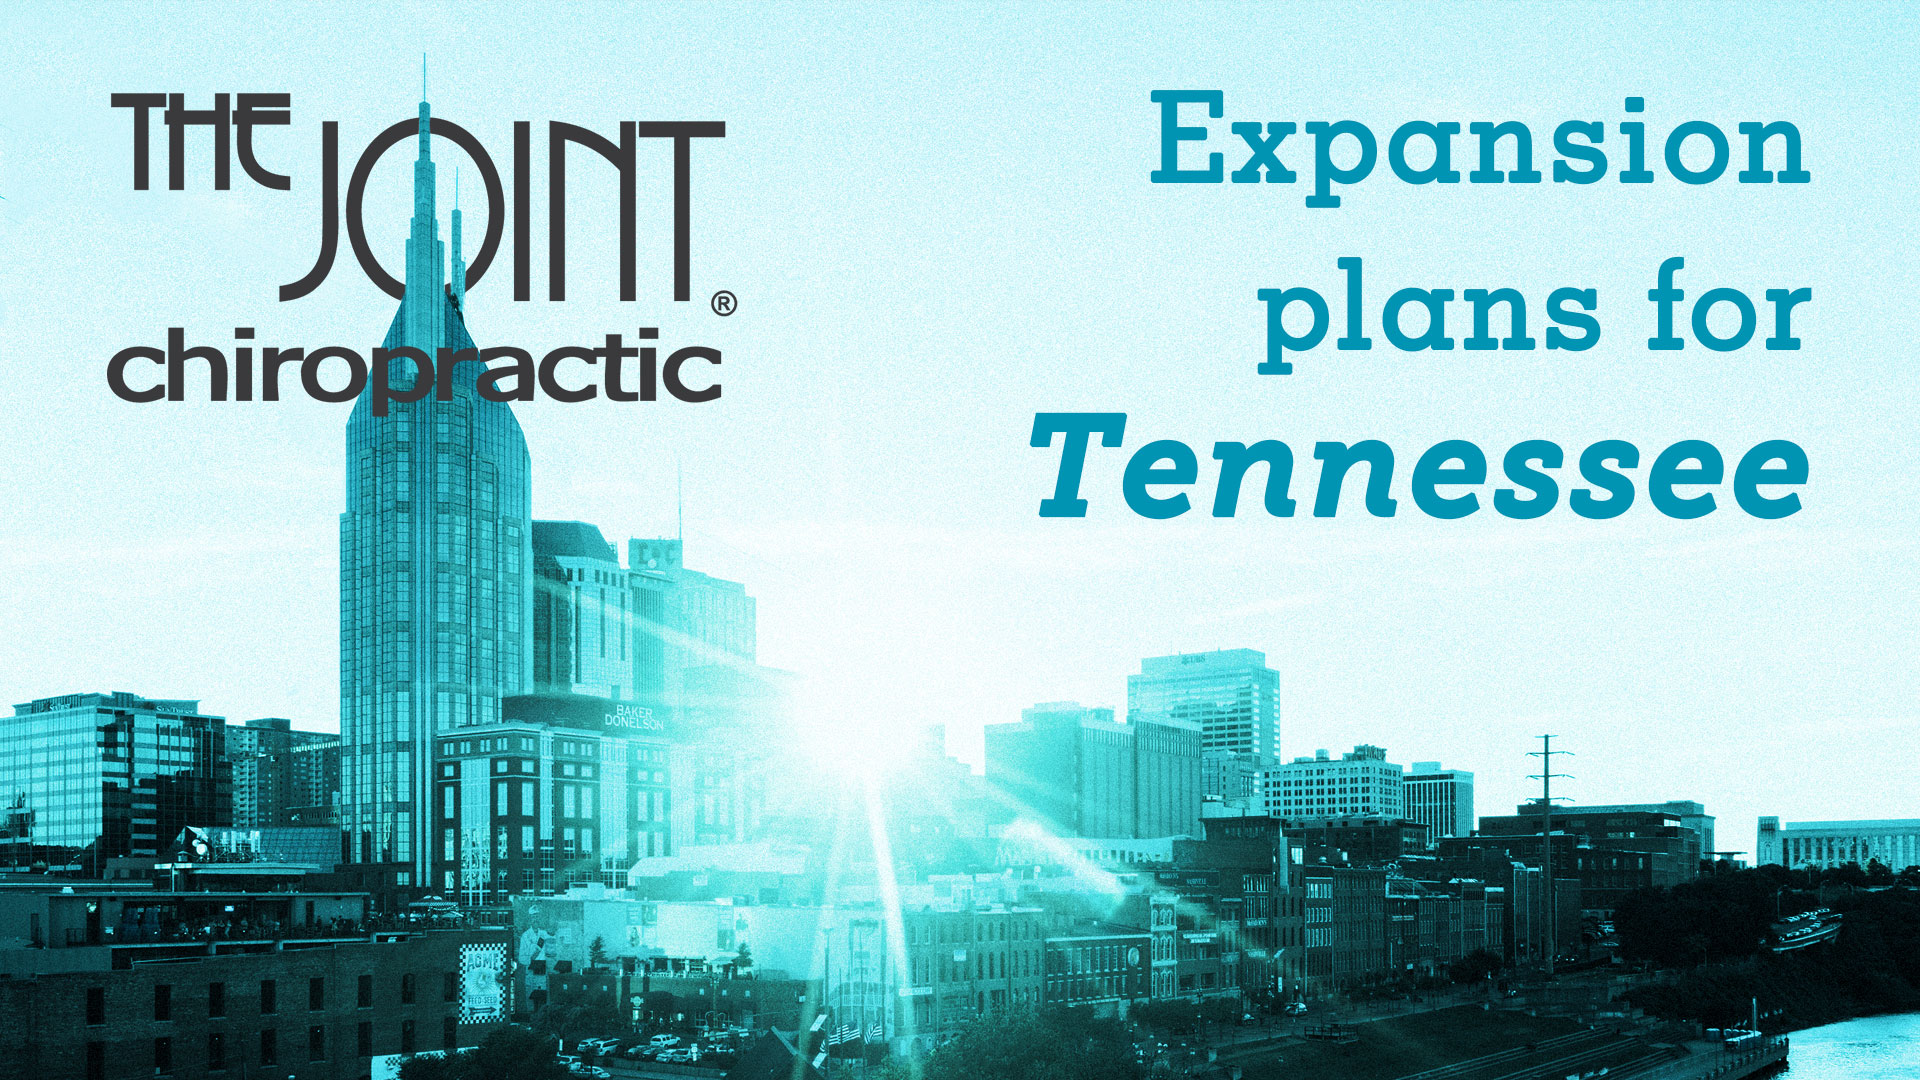 Image of Nashville, with "Expansion Plans For Tennessee" caption.